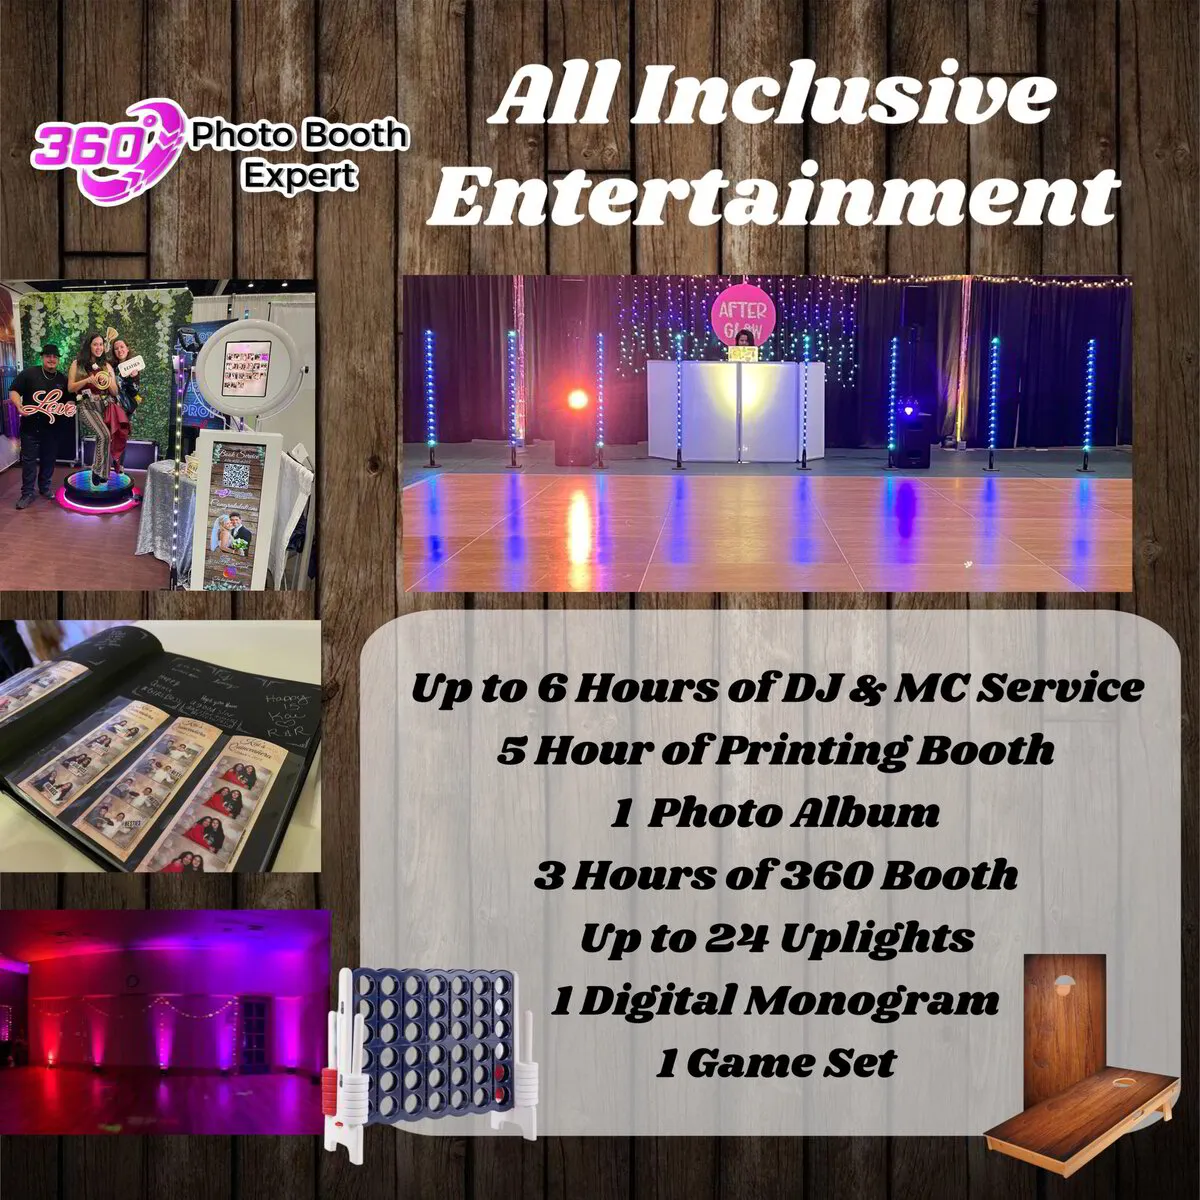 All inclusive wedding entertainment bundle package